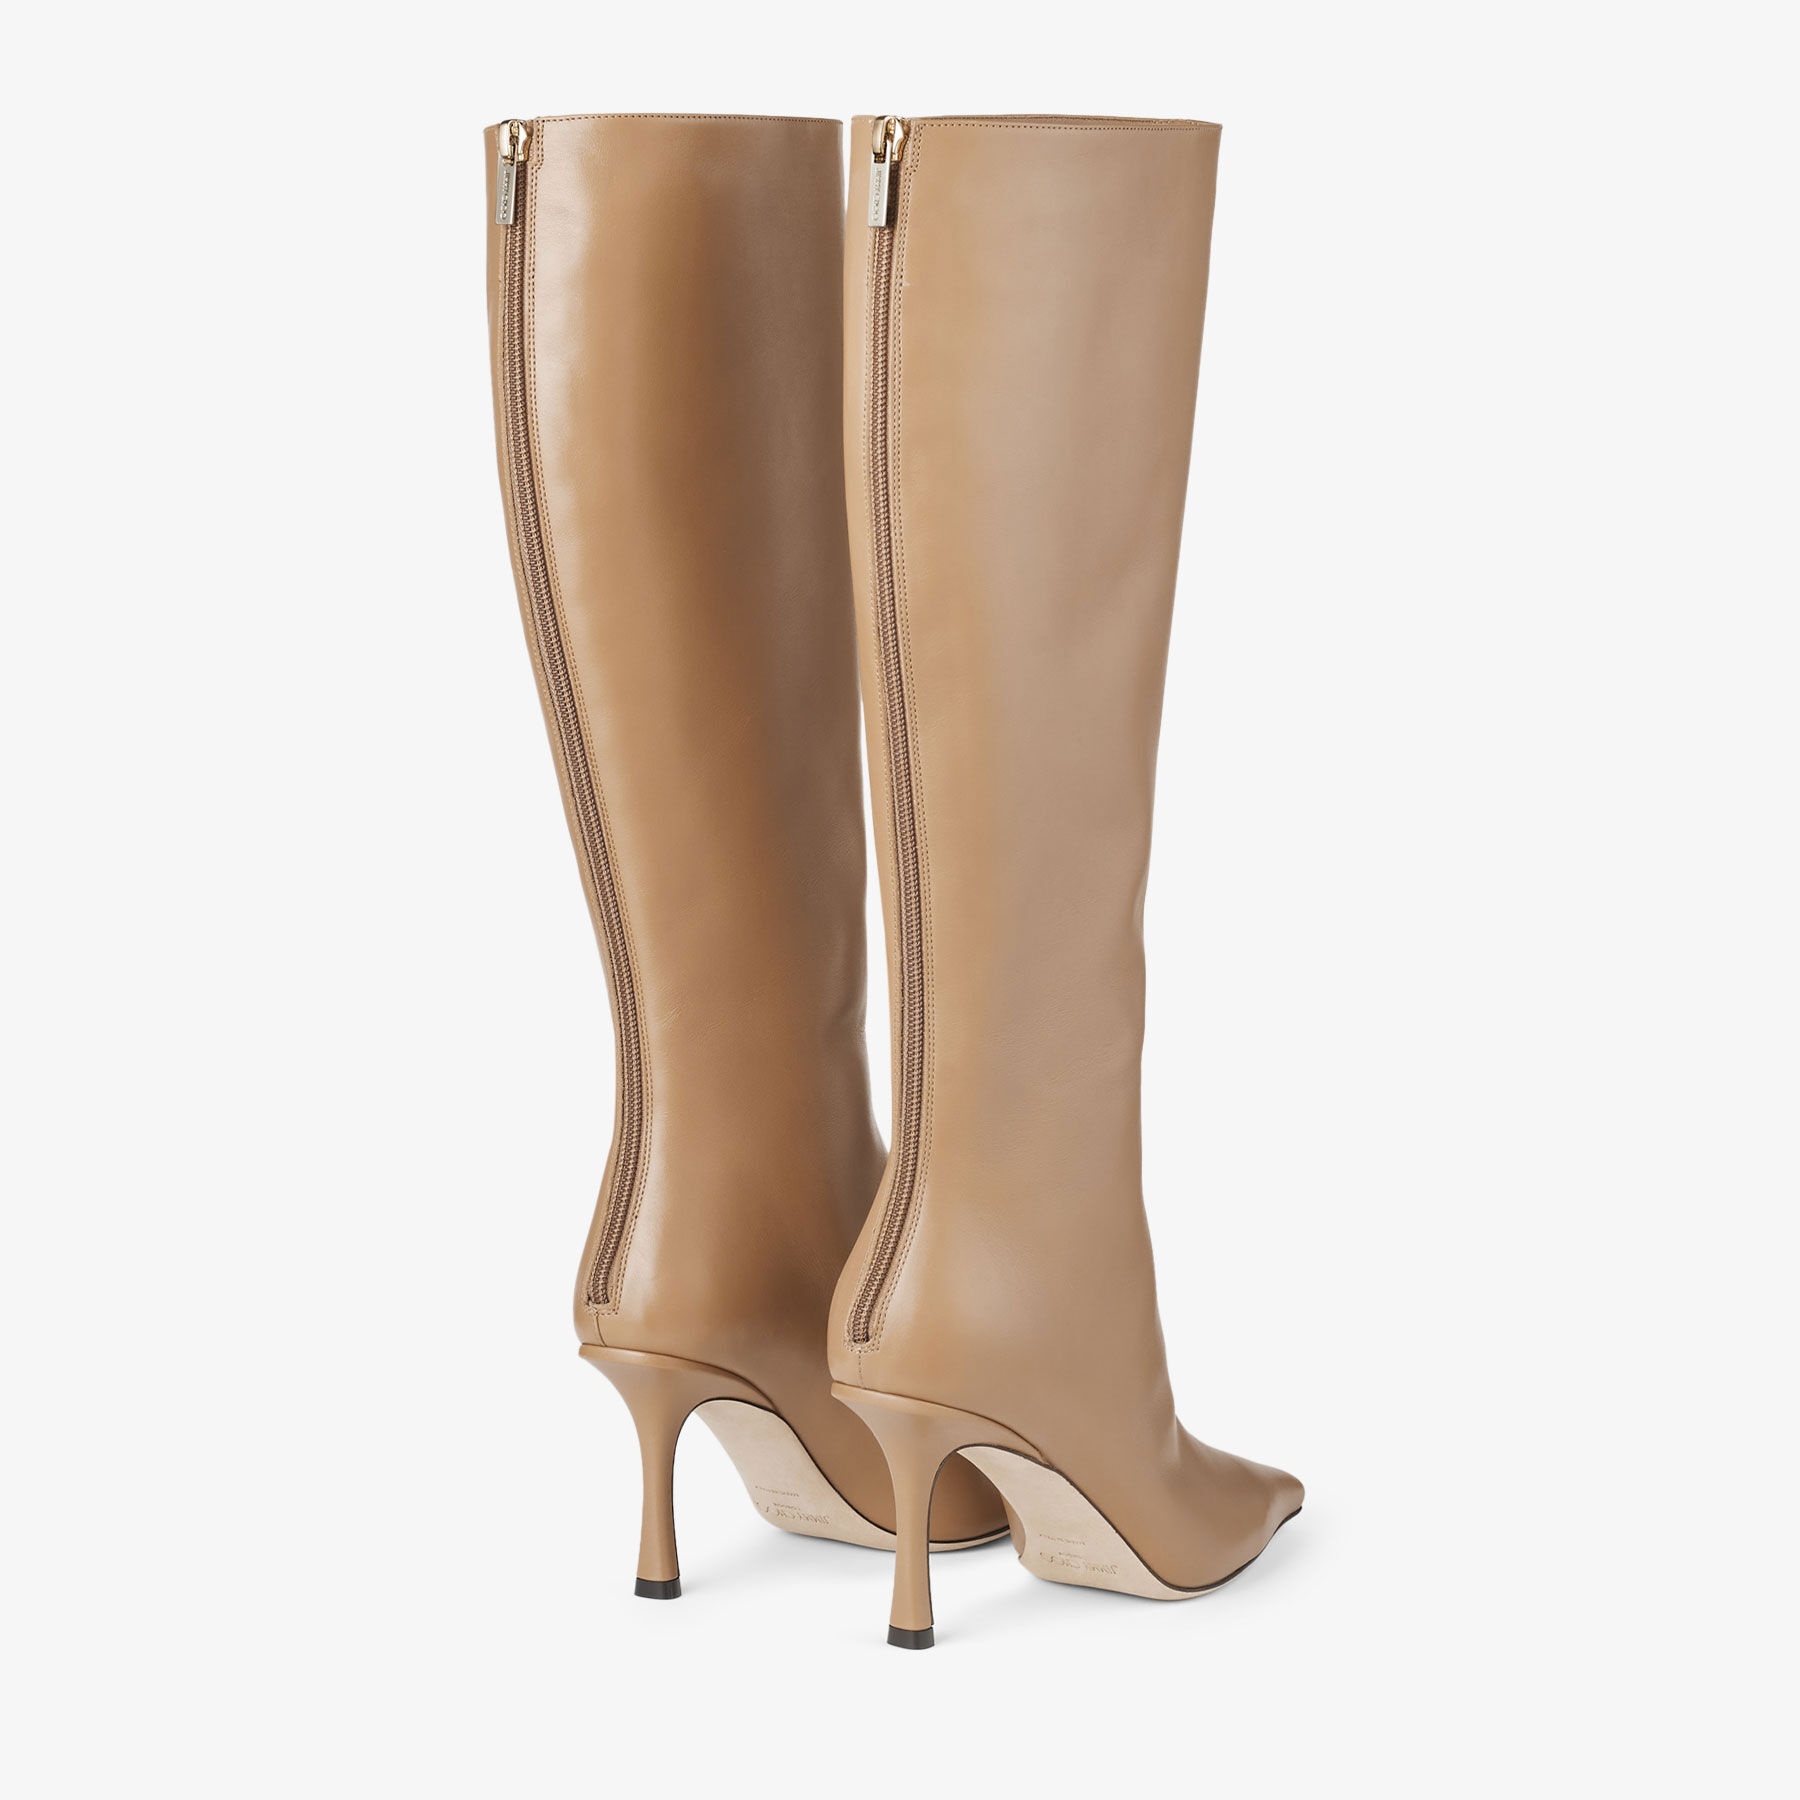 Agathe Knee Boot 85
Biscuit Calf Leather Knee-High Boots - 6